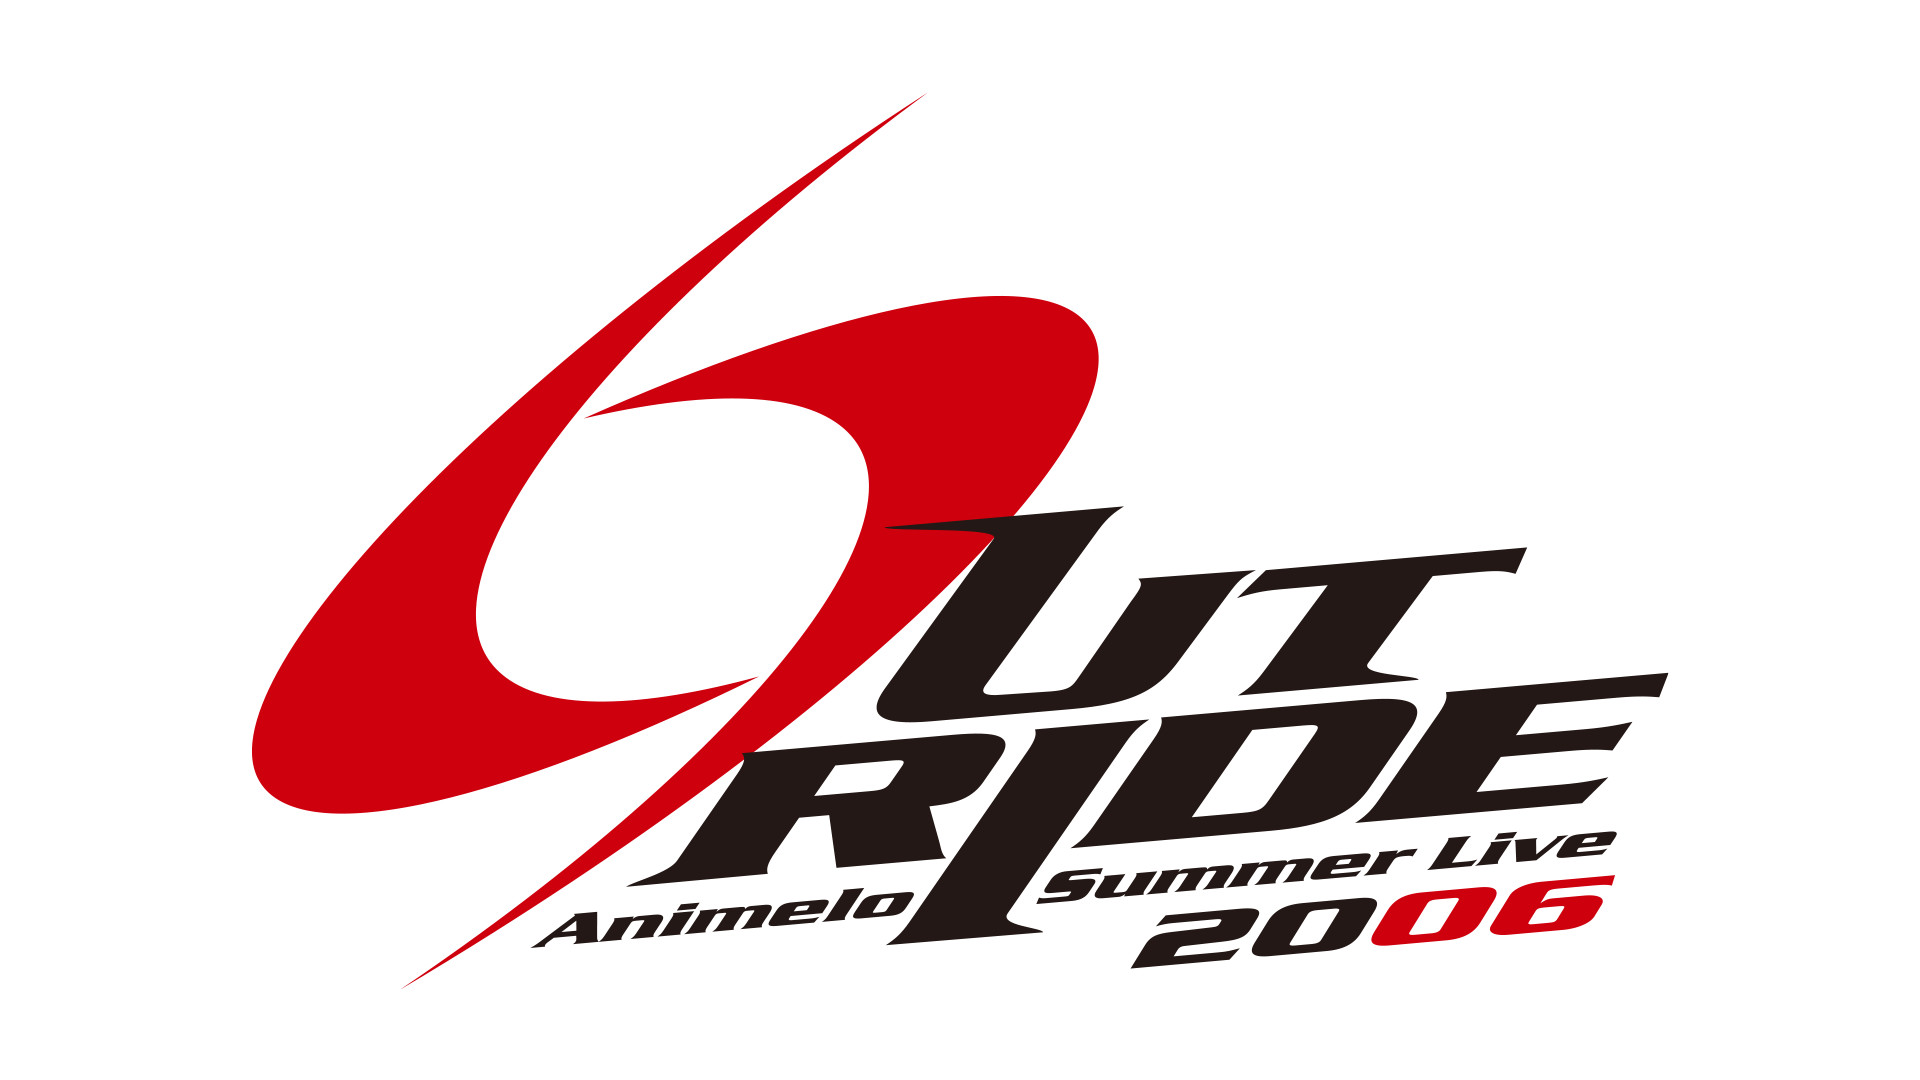 Animelo Summer Live 06 Outride アニメ動画見放題 Dアニメストア